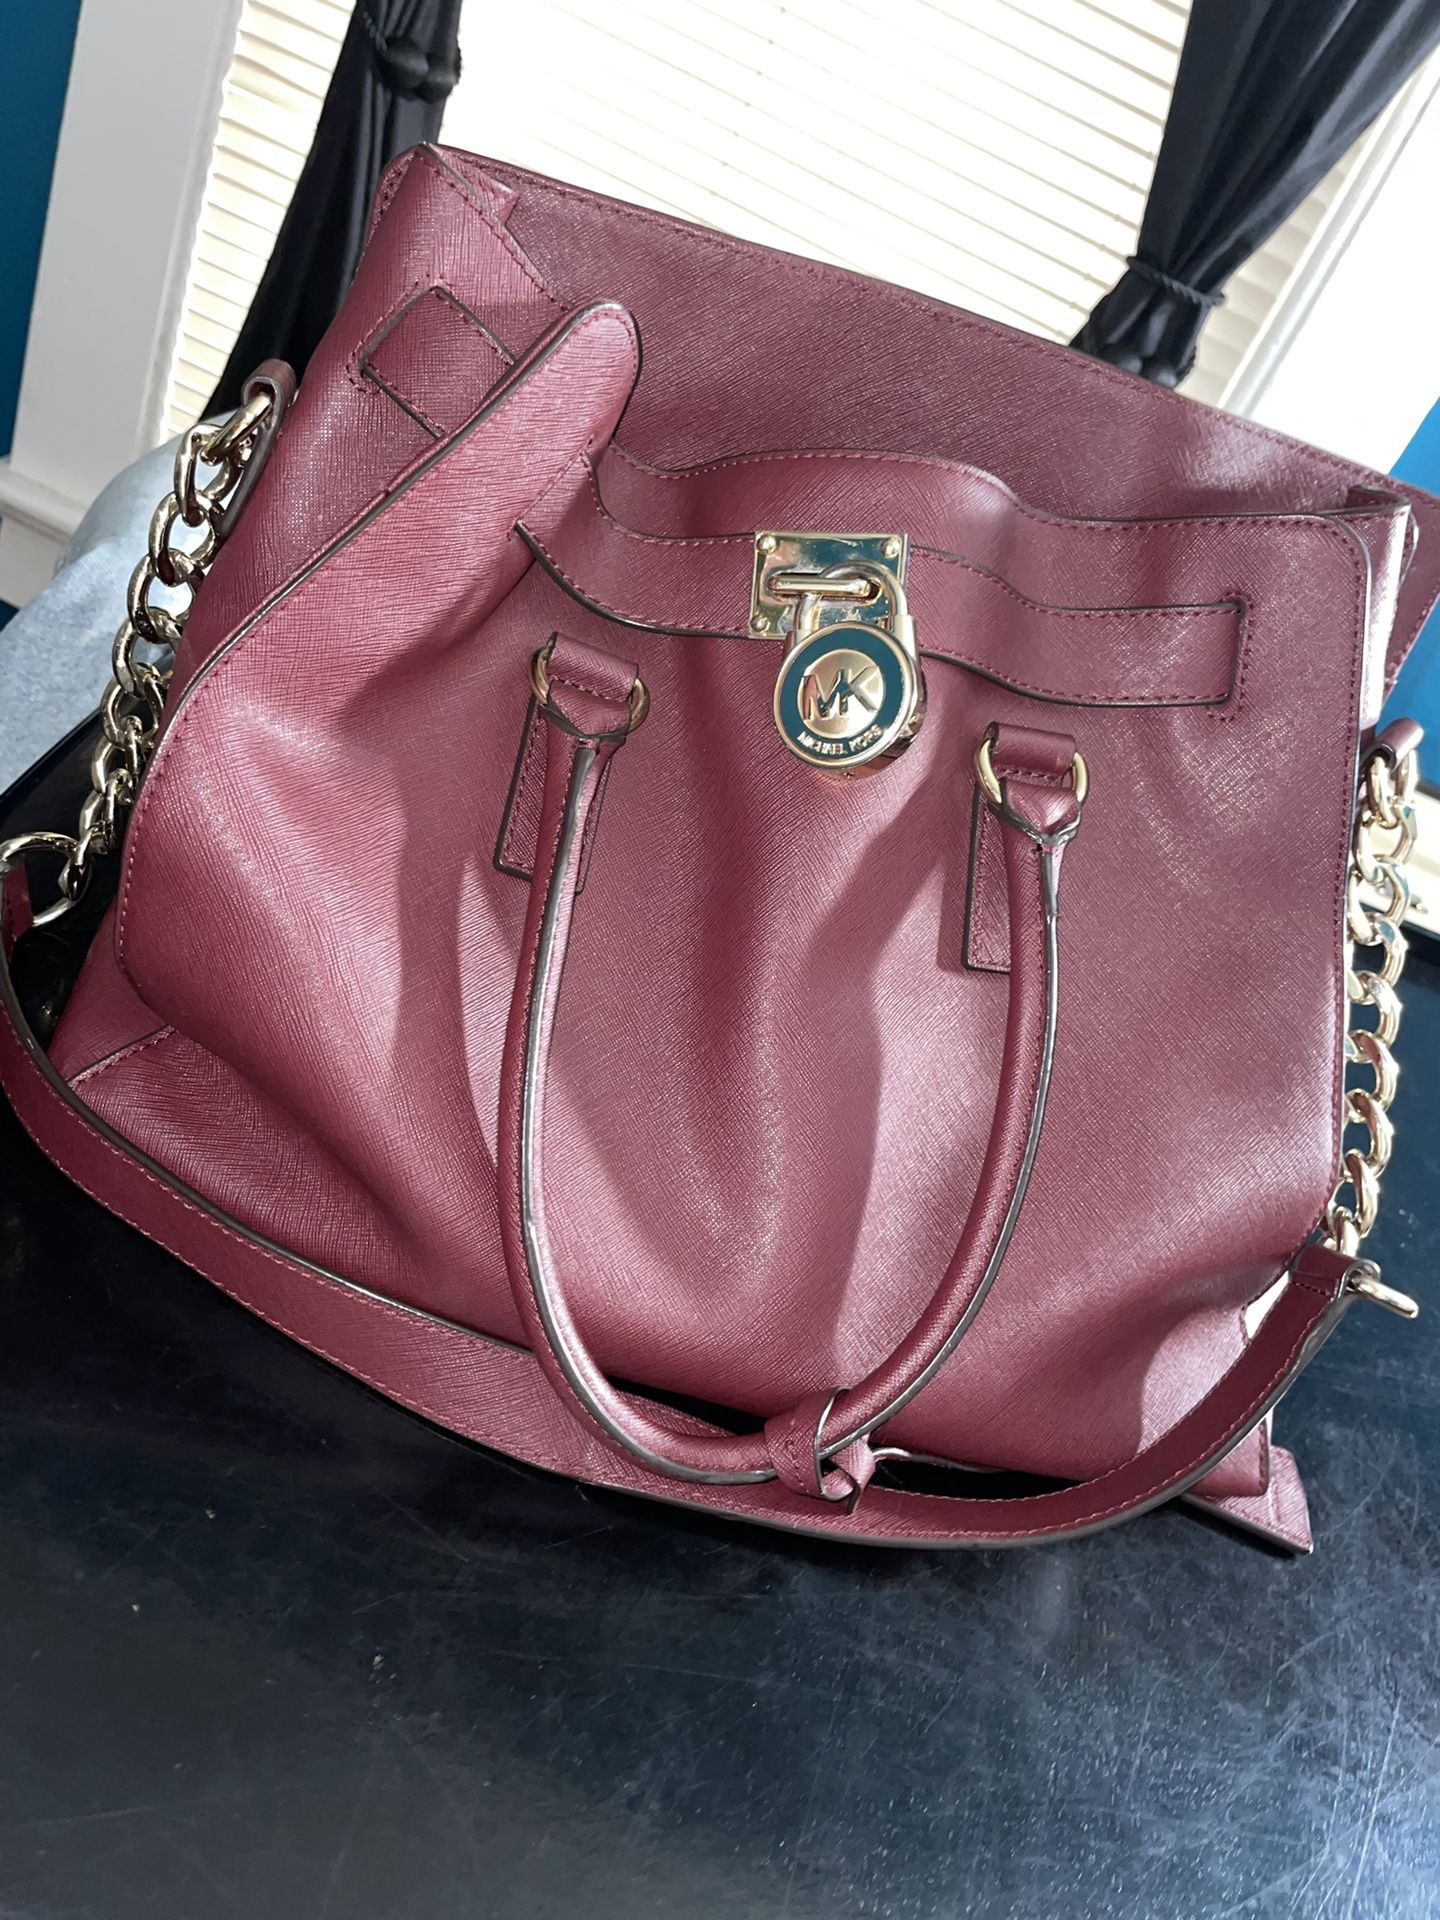 MK Large Leather Tote Bag